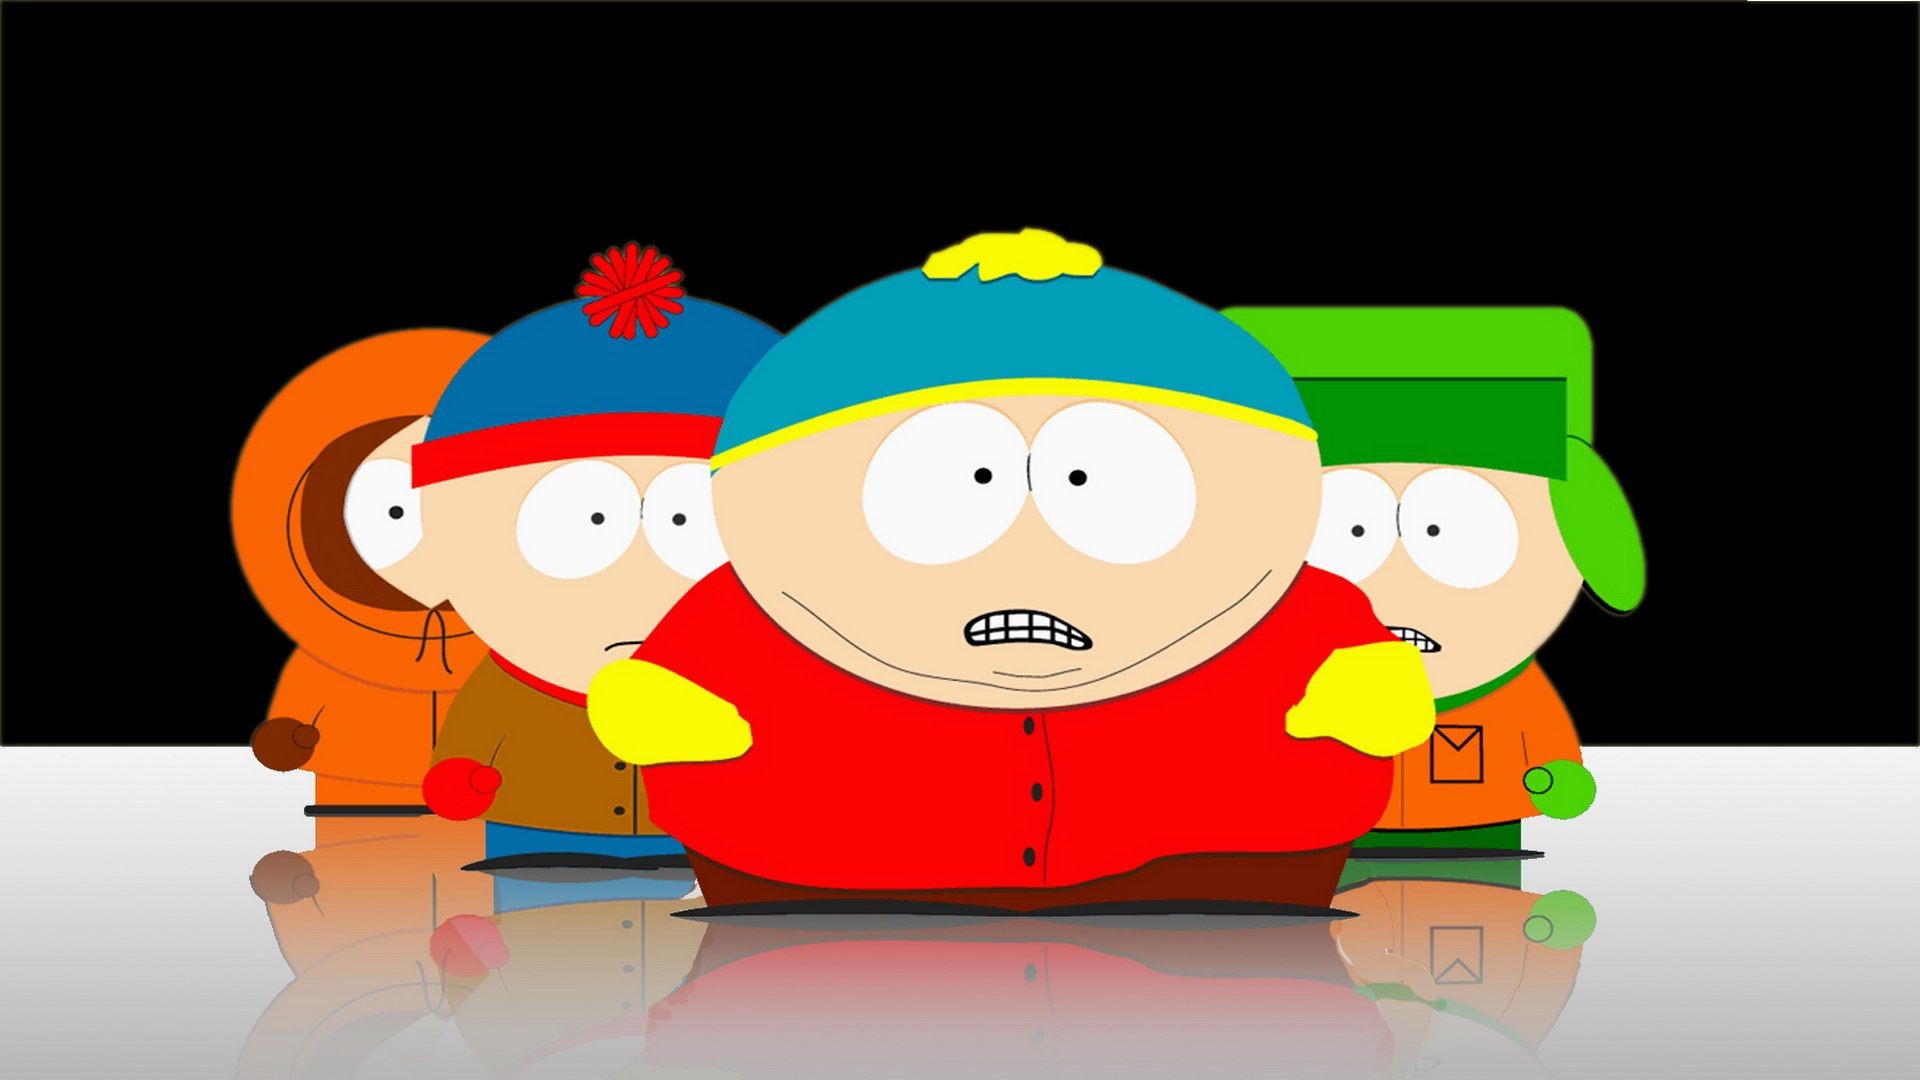 1920x1080 Cool South Park Boat Hd Wallpapers 1280x1024PX ~ South Park .